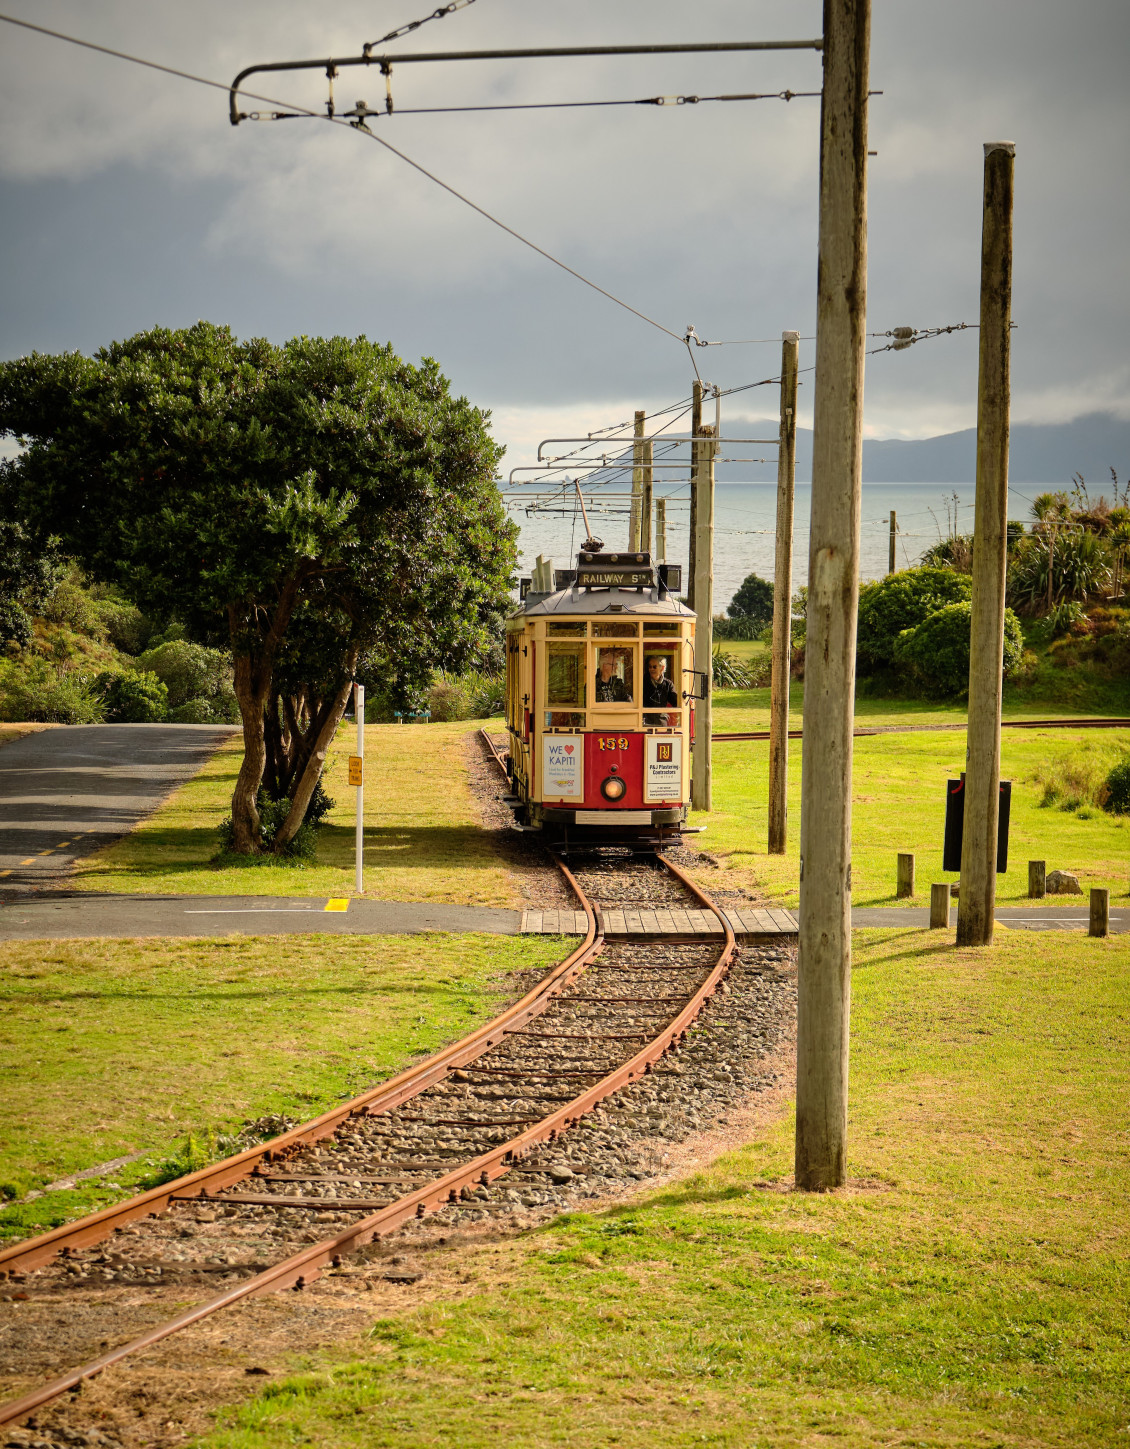 A view of the tram at Queen Elizabeth Park